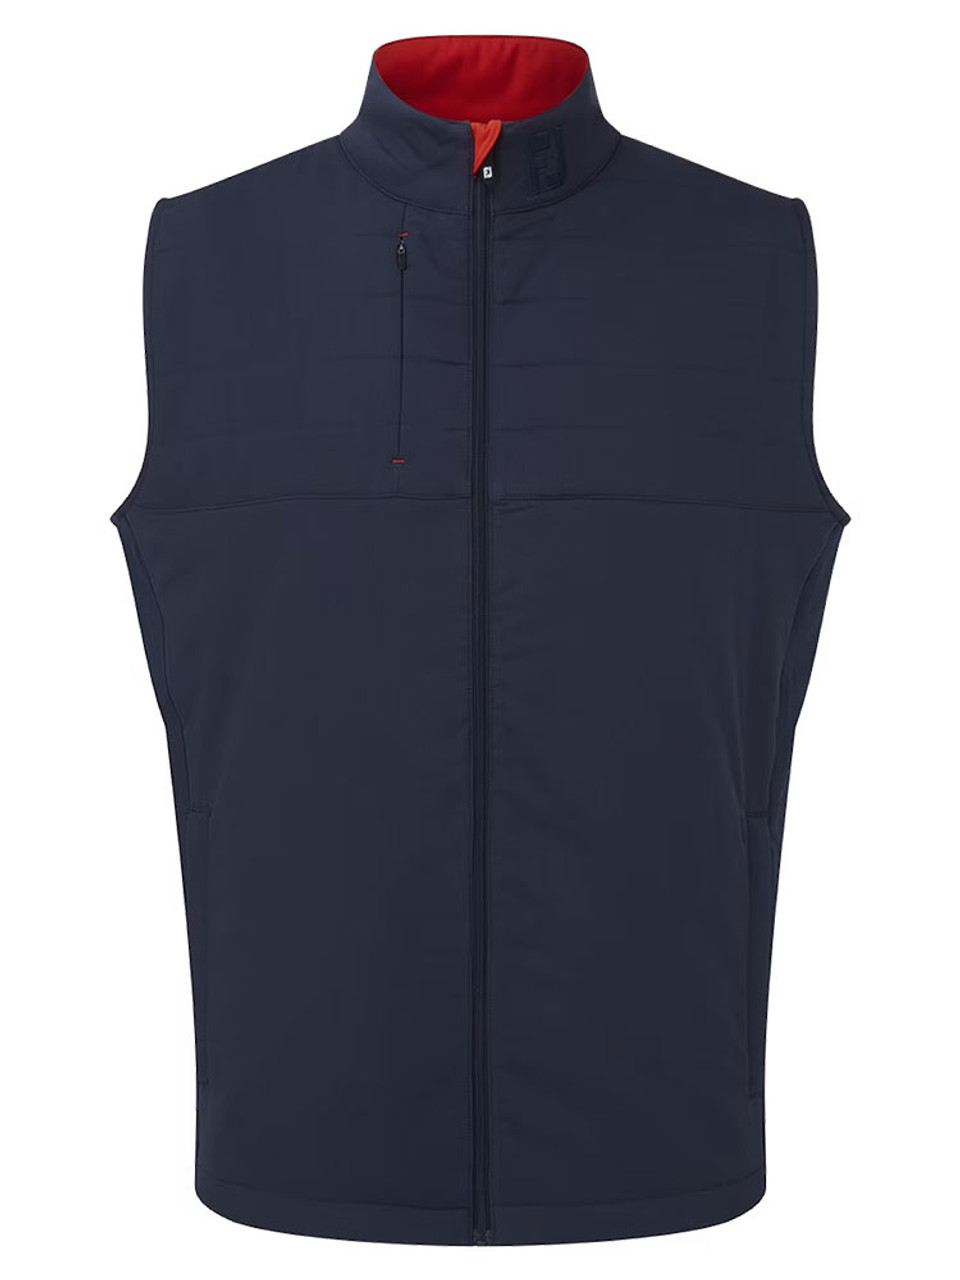 FootJoy Insulated Vest - Navy | GolfBox